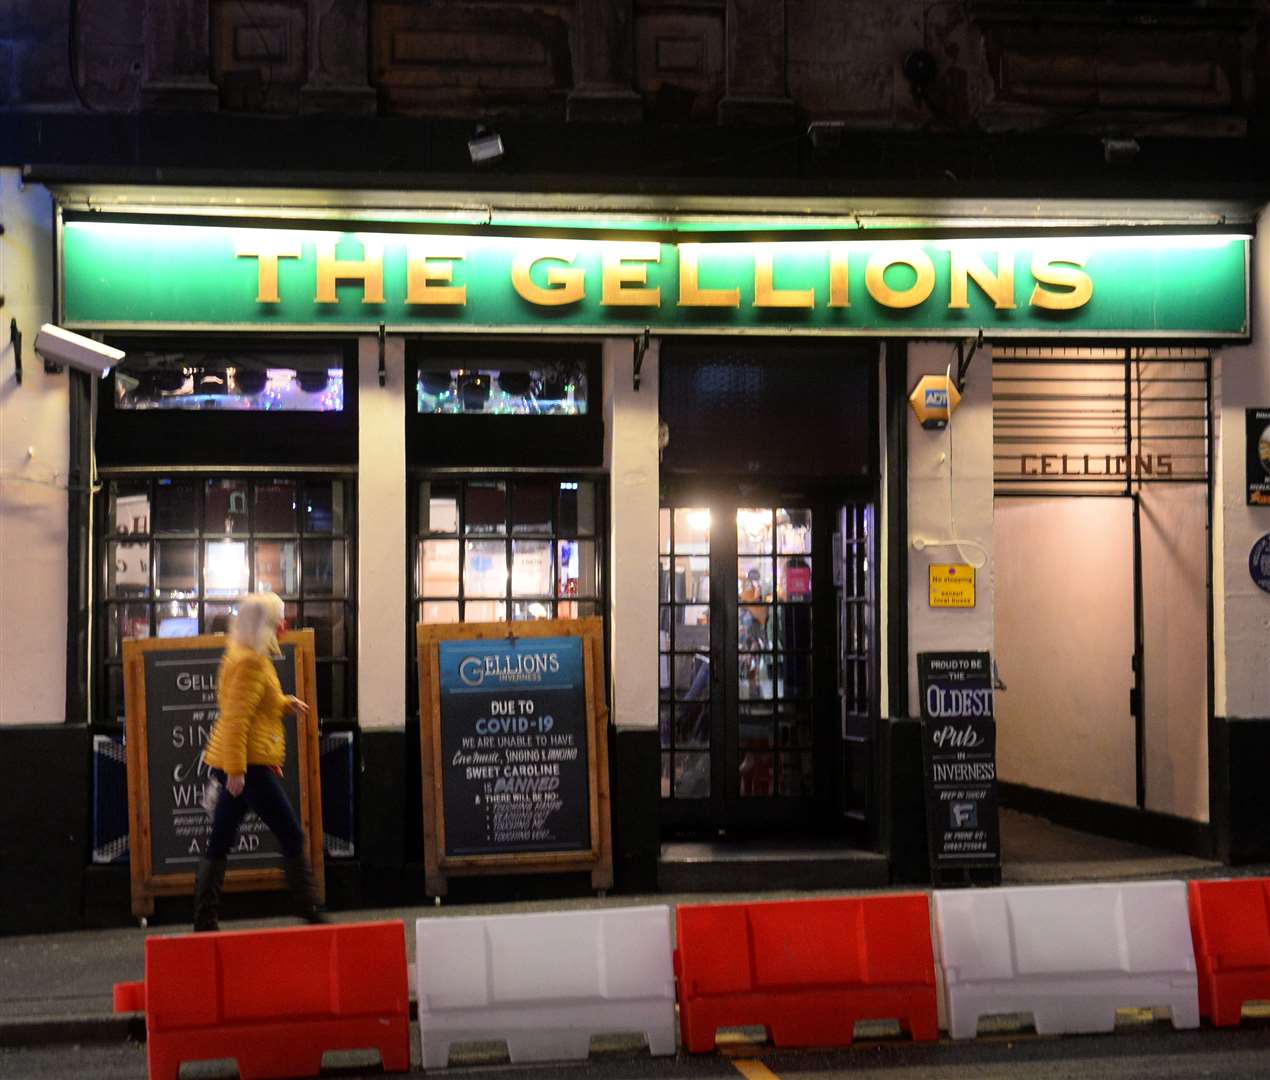 Gellions landlord Gavin Stevenson is among those warning of the 'Armageddon' facing Scotland's pubs and clubs without further support.